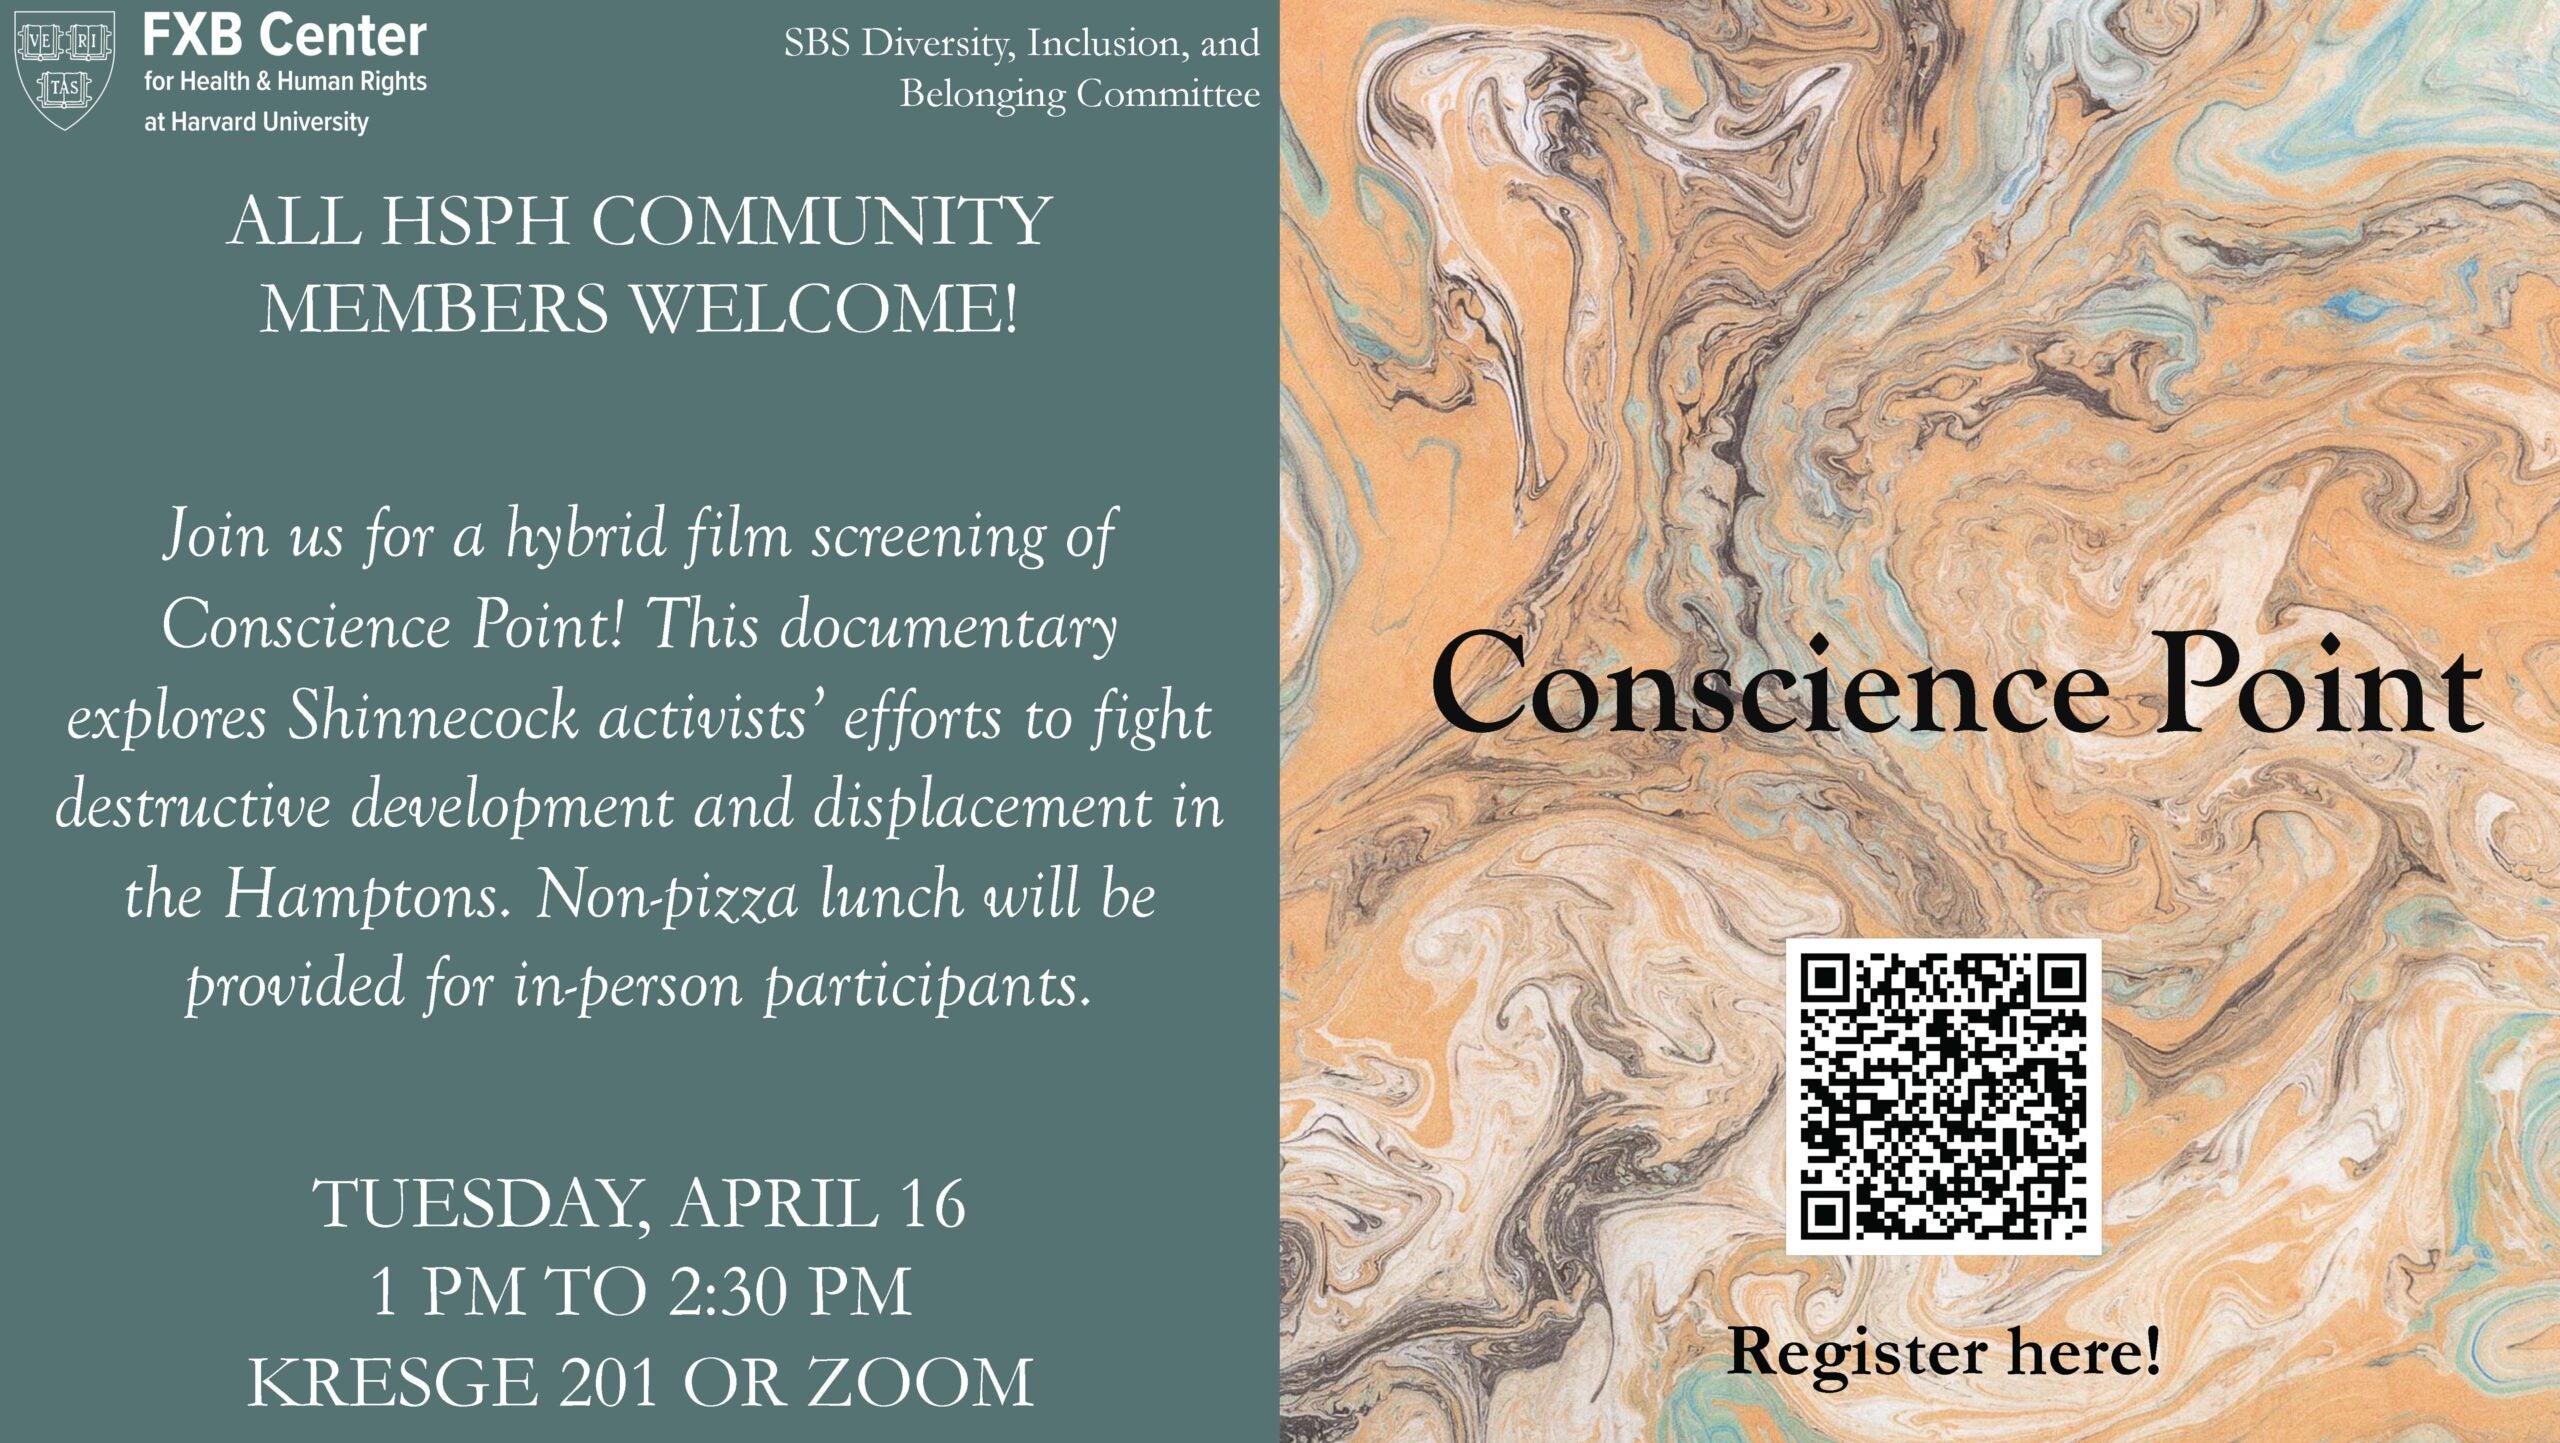 FXB Center for Health and Human Rights logo, SBS Diversity, Inclusion and Belonging Committee. All HSPH Community Members Welcome! Join us for a hybrid film screening of Conscience Point! This documentary explores Shinnecock activists' efforts to fight destructive development and displacement in the Hamptons. Non-pizza lunch will be provided for in-person participants. Tuesday, April 16, 1pm-2:30pm, Kresge 201 or Zoom.